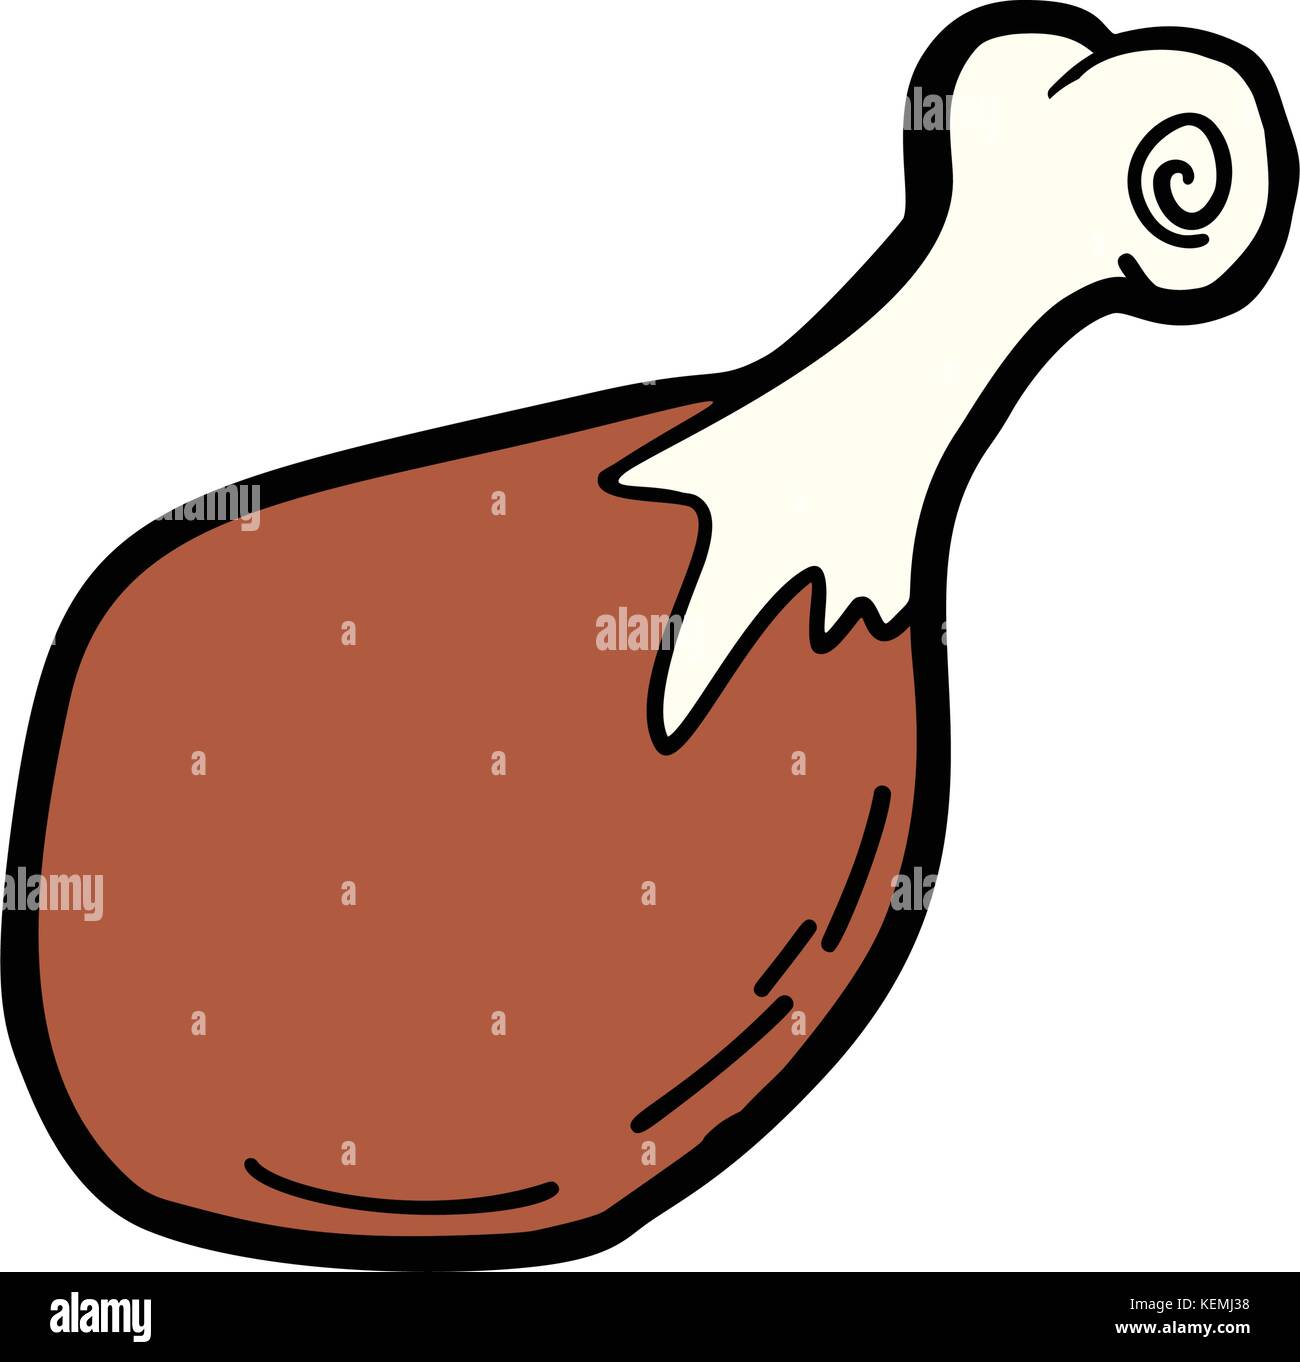 ham leg, meat product, pork or beef Stock Vector